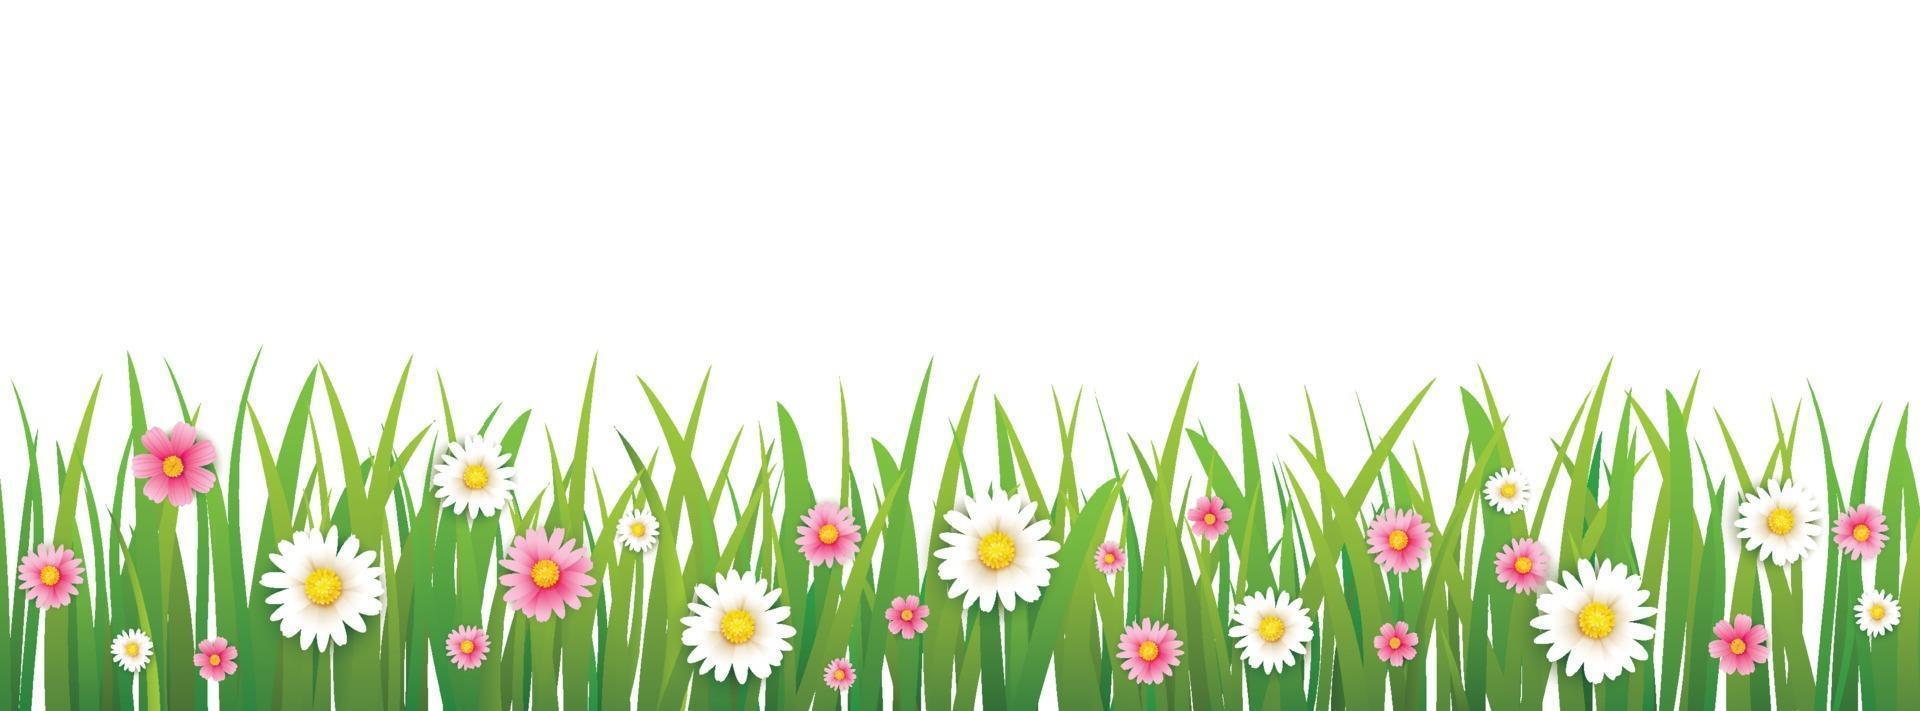 hello spring flower with grass isolated background. vector